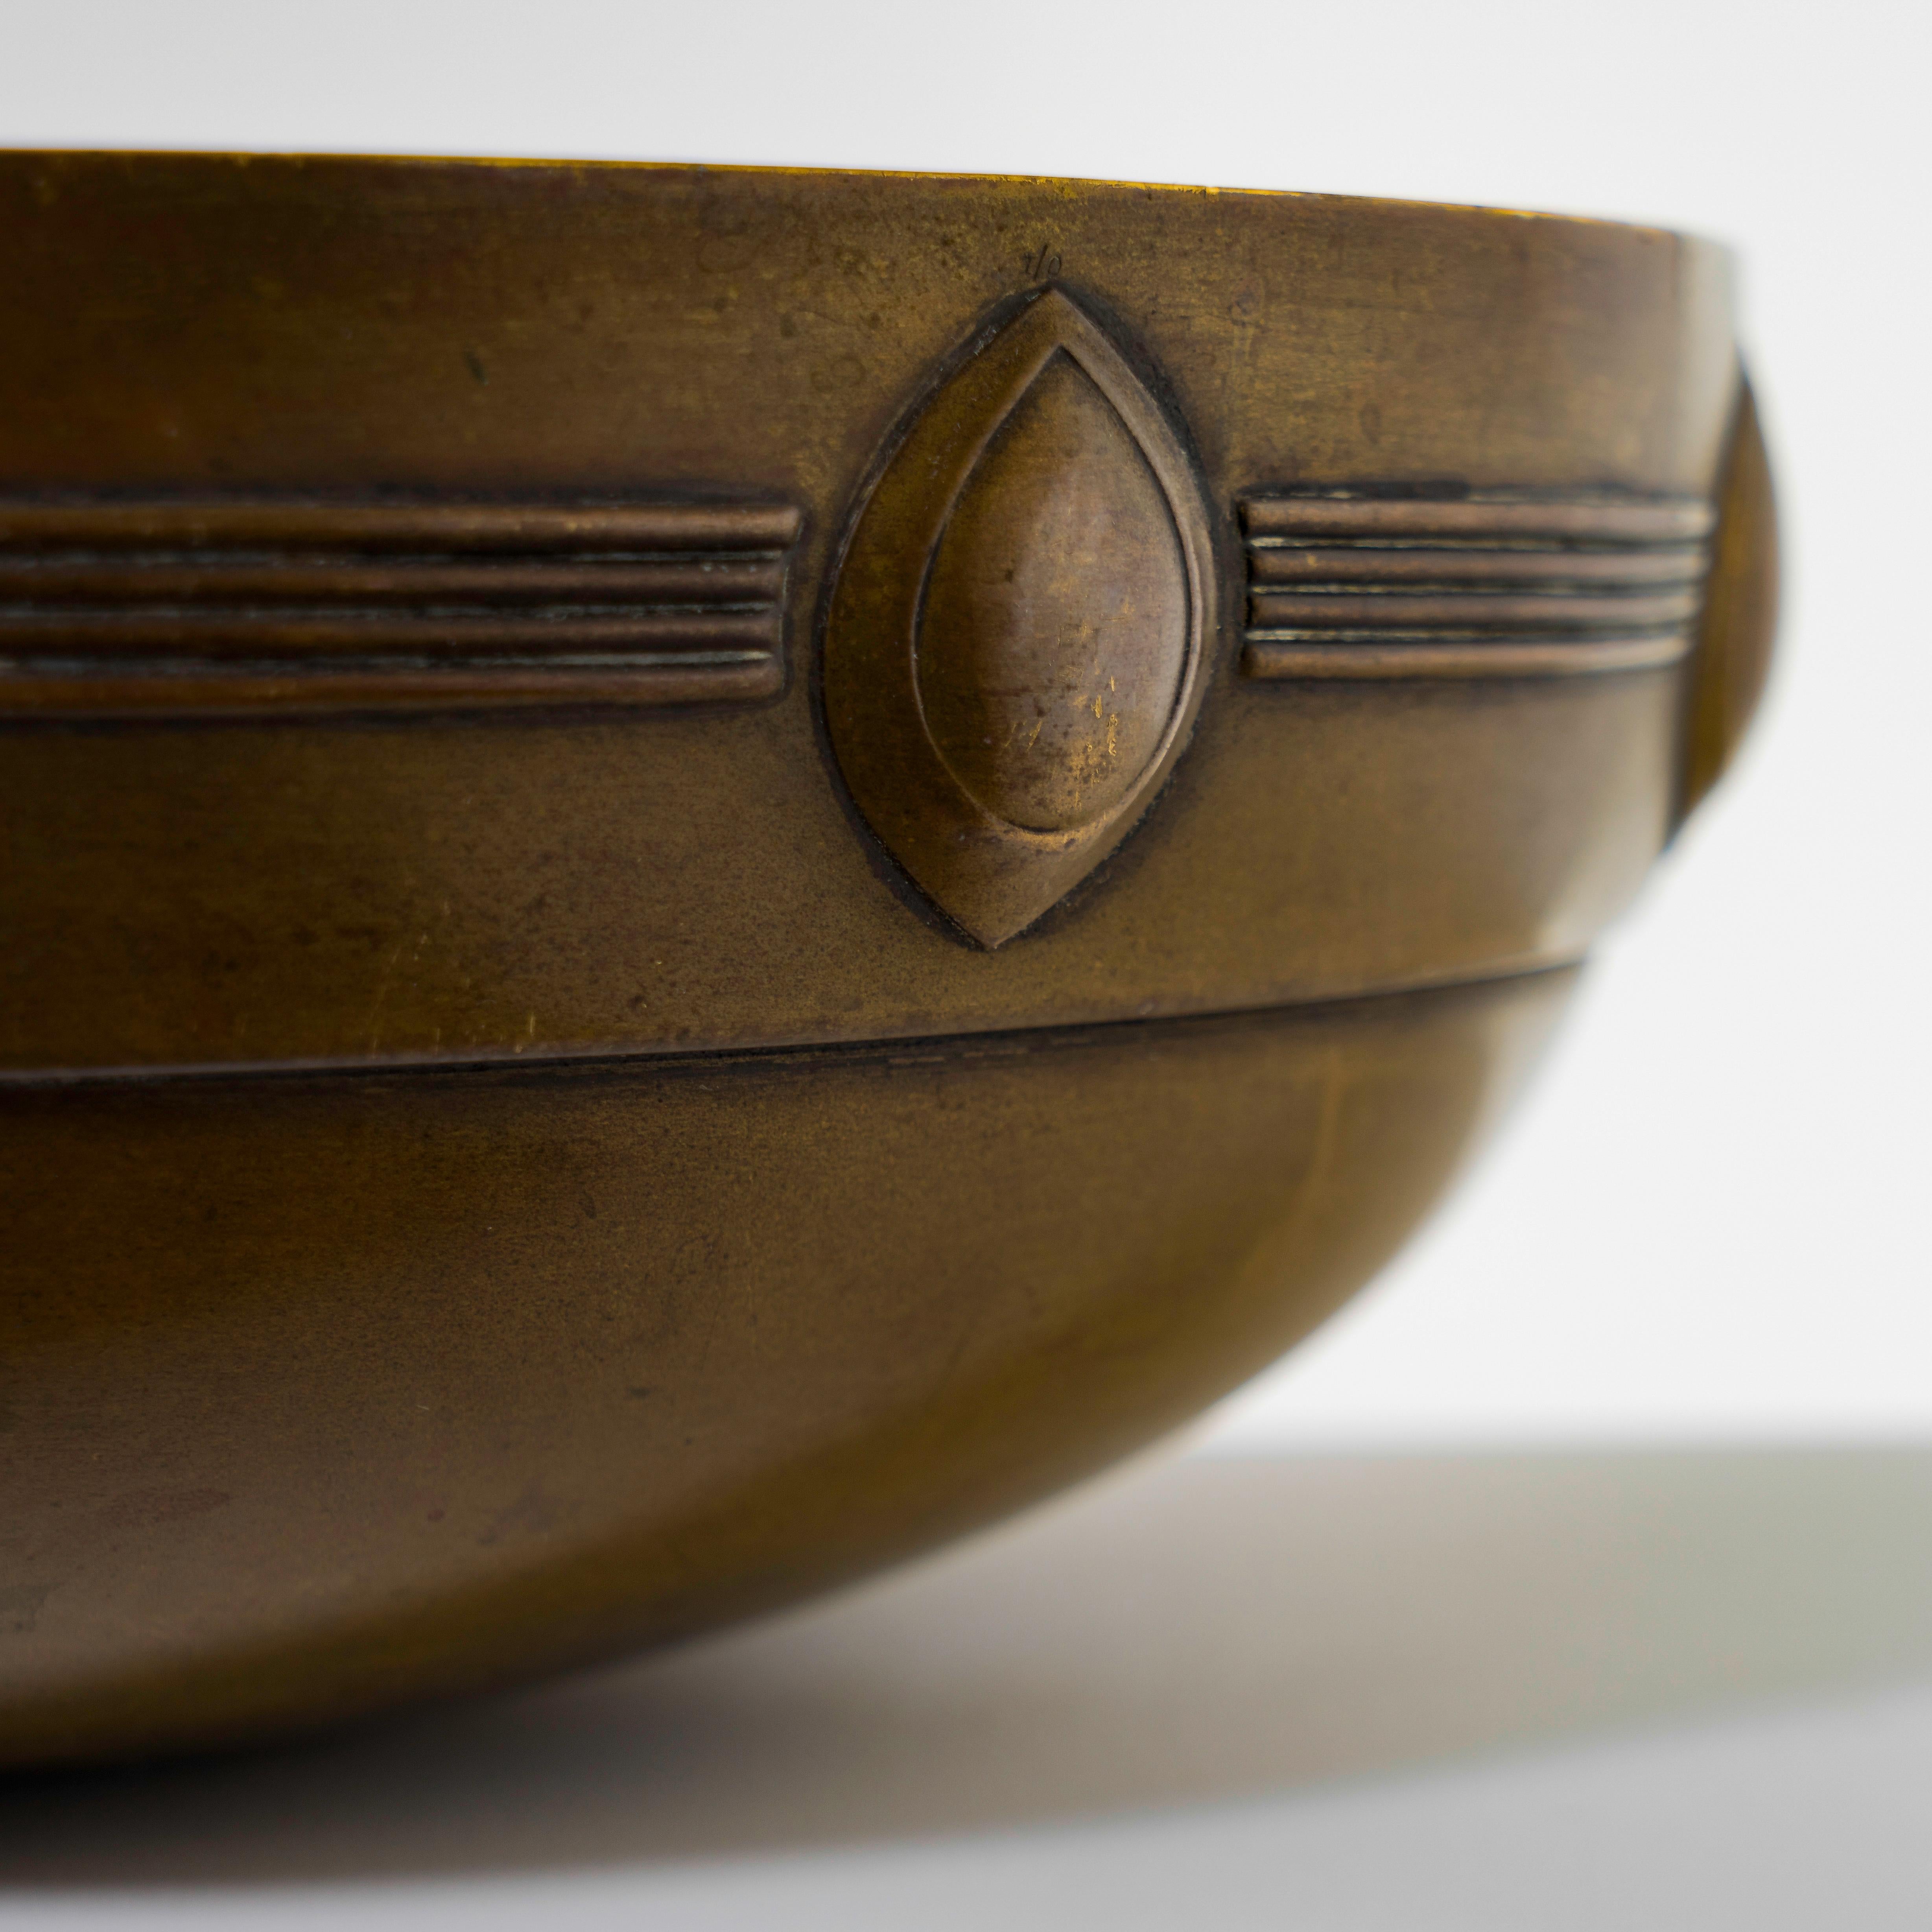 Metal bowl designed by the German architect and designer Albin Camillo Muller (1871-1941), manufactured in brass by WMF (Württembergische Metallwarenfabrik, no hallmark visible) a German producer of household metal ware, created, circa 1880. By 1900